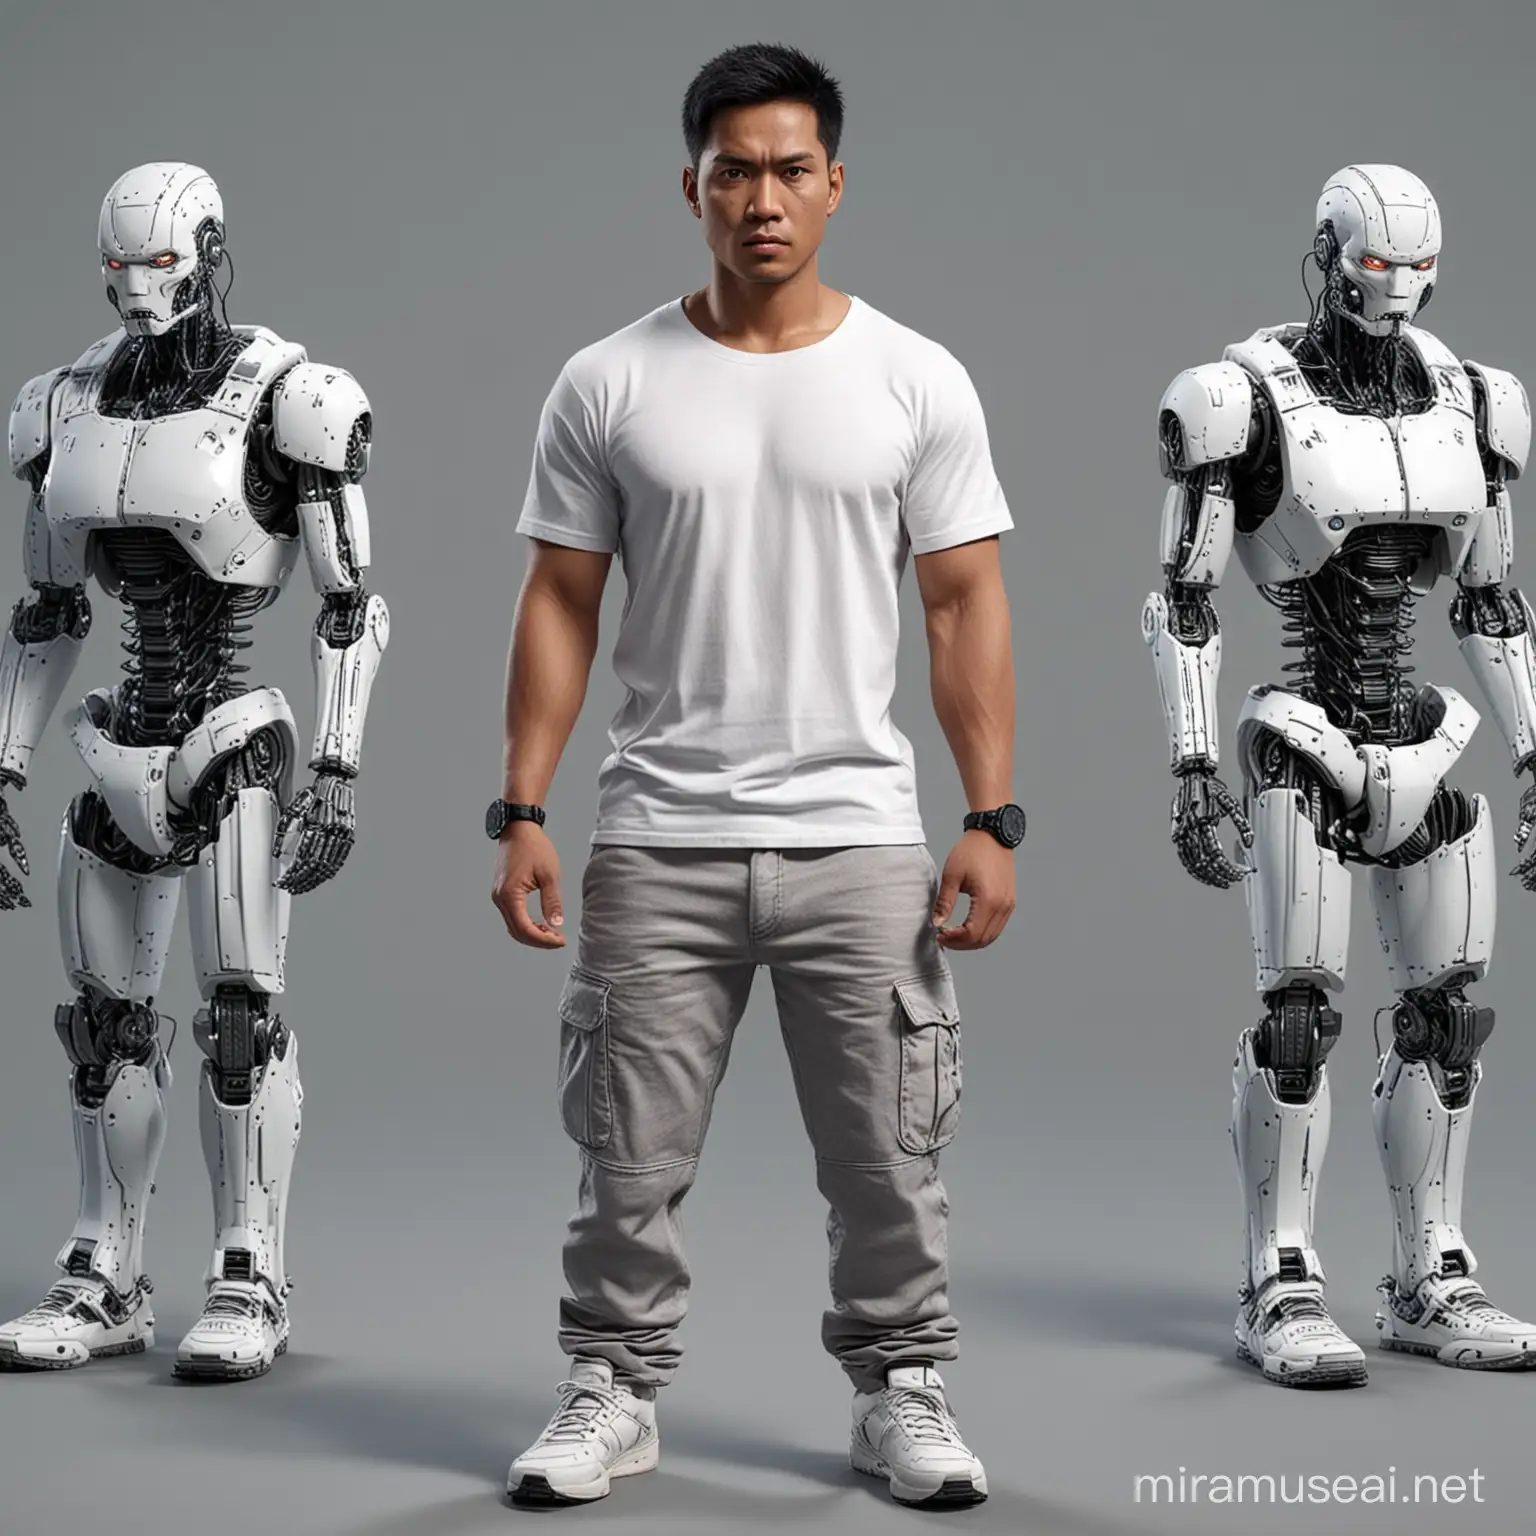 Indonesian Man with Robotic HalfFace in Casual Attire